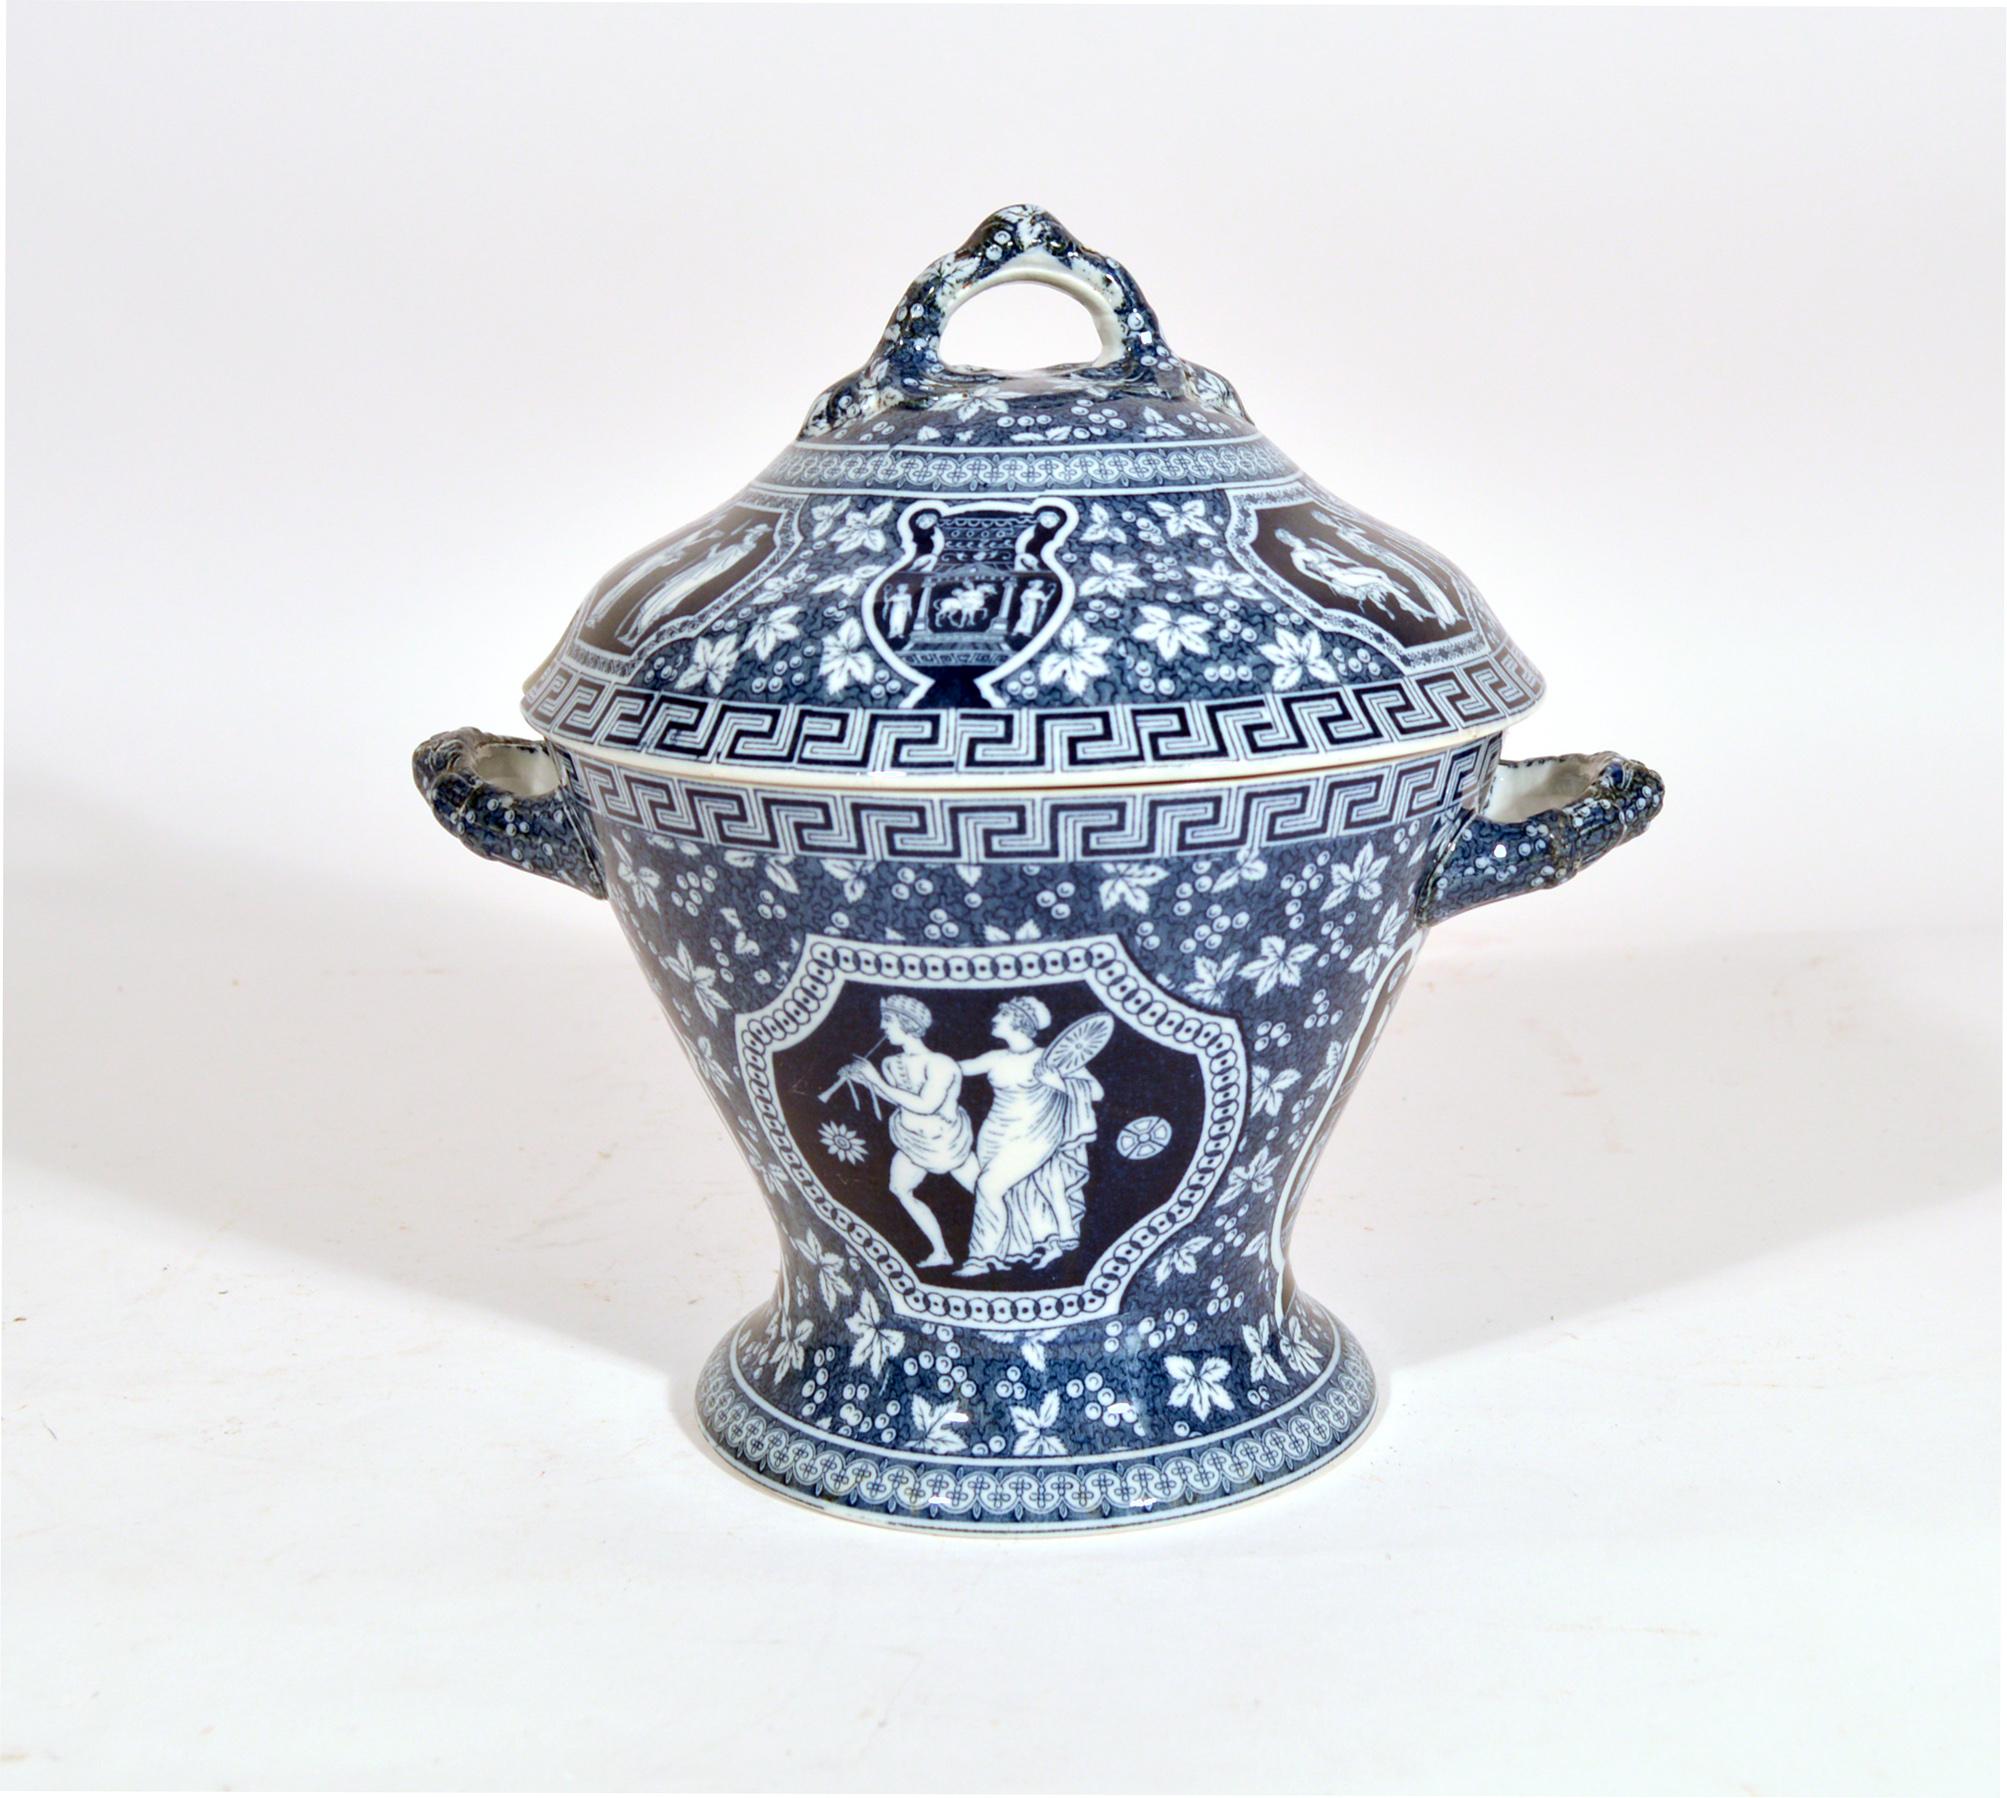 Copeland-Late Spode Neo-classical greek pattern blue circular tureen and cover,
1902

The Spode pottery covered footed tureen of circular form with the underglaze blue Greek pattern with urns and shaped panels with neo-classical figures. The